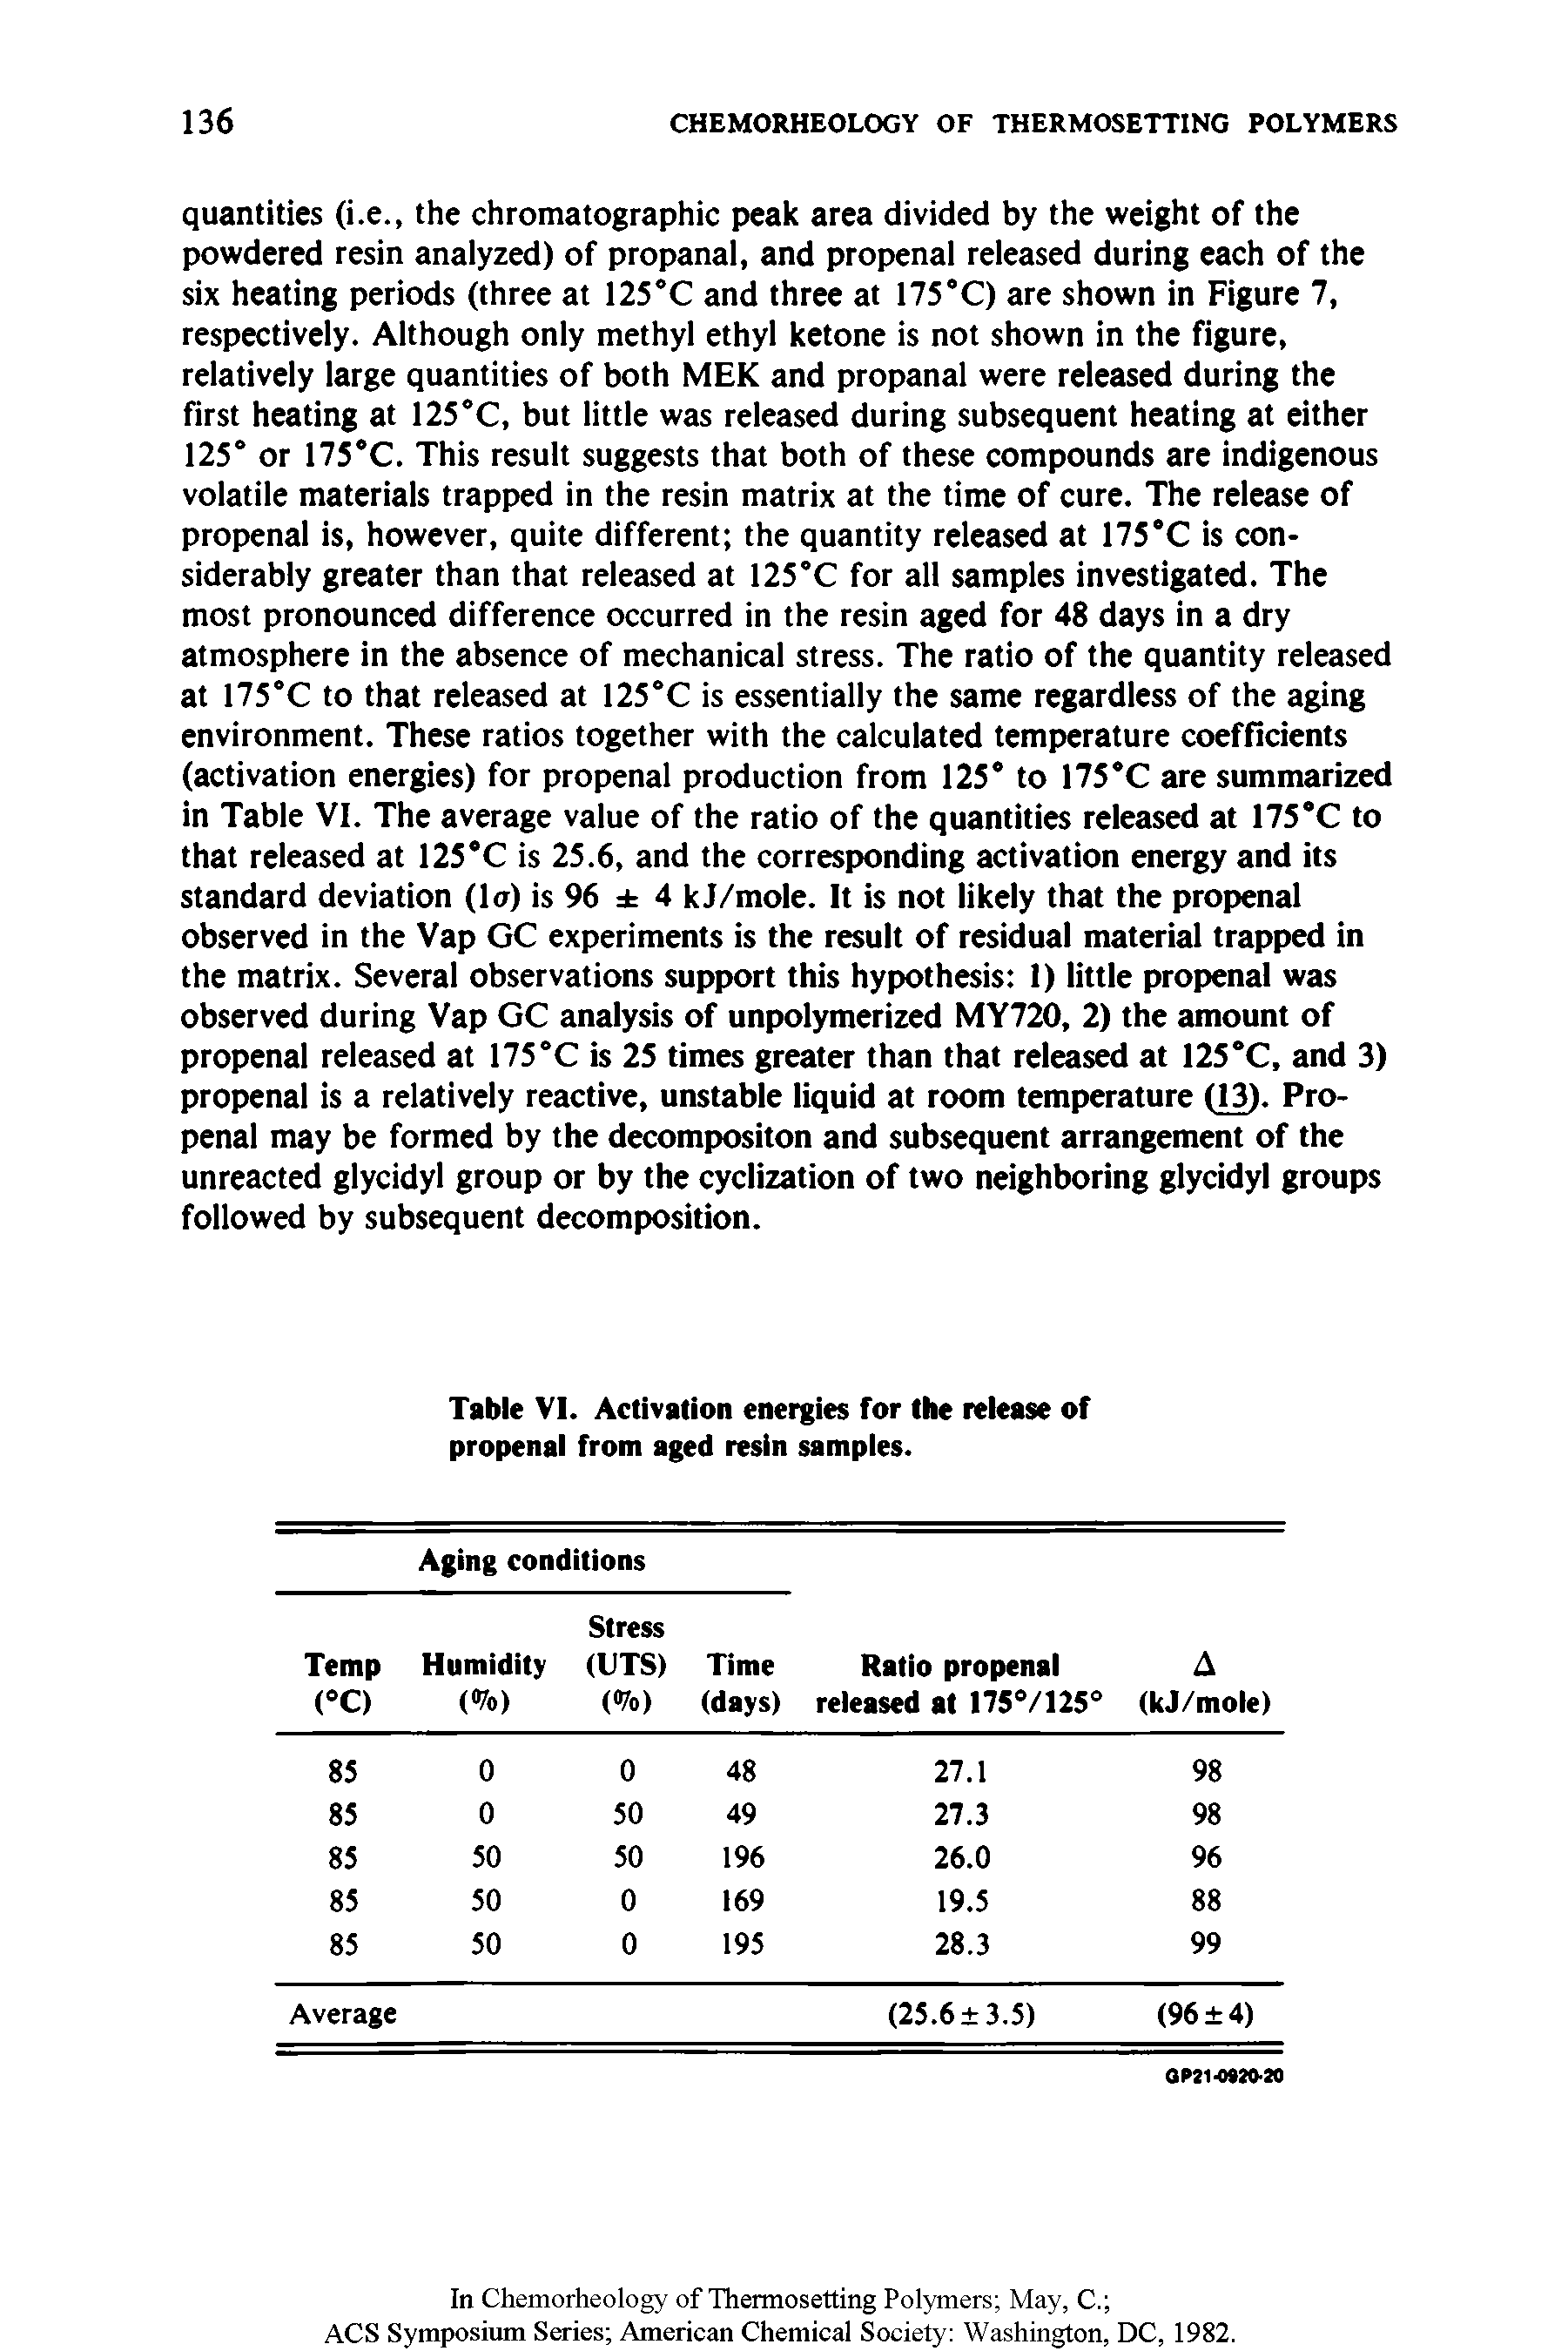 Table VI. Activation energies for the release of propenal from aged resin samples.